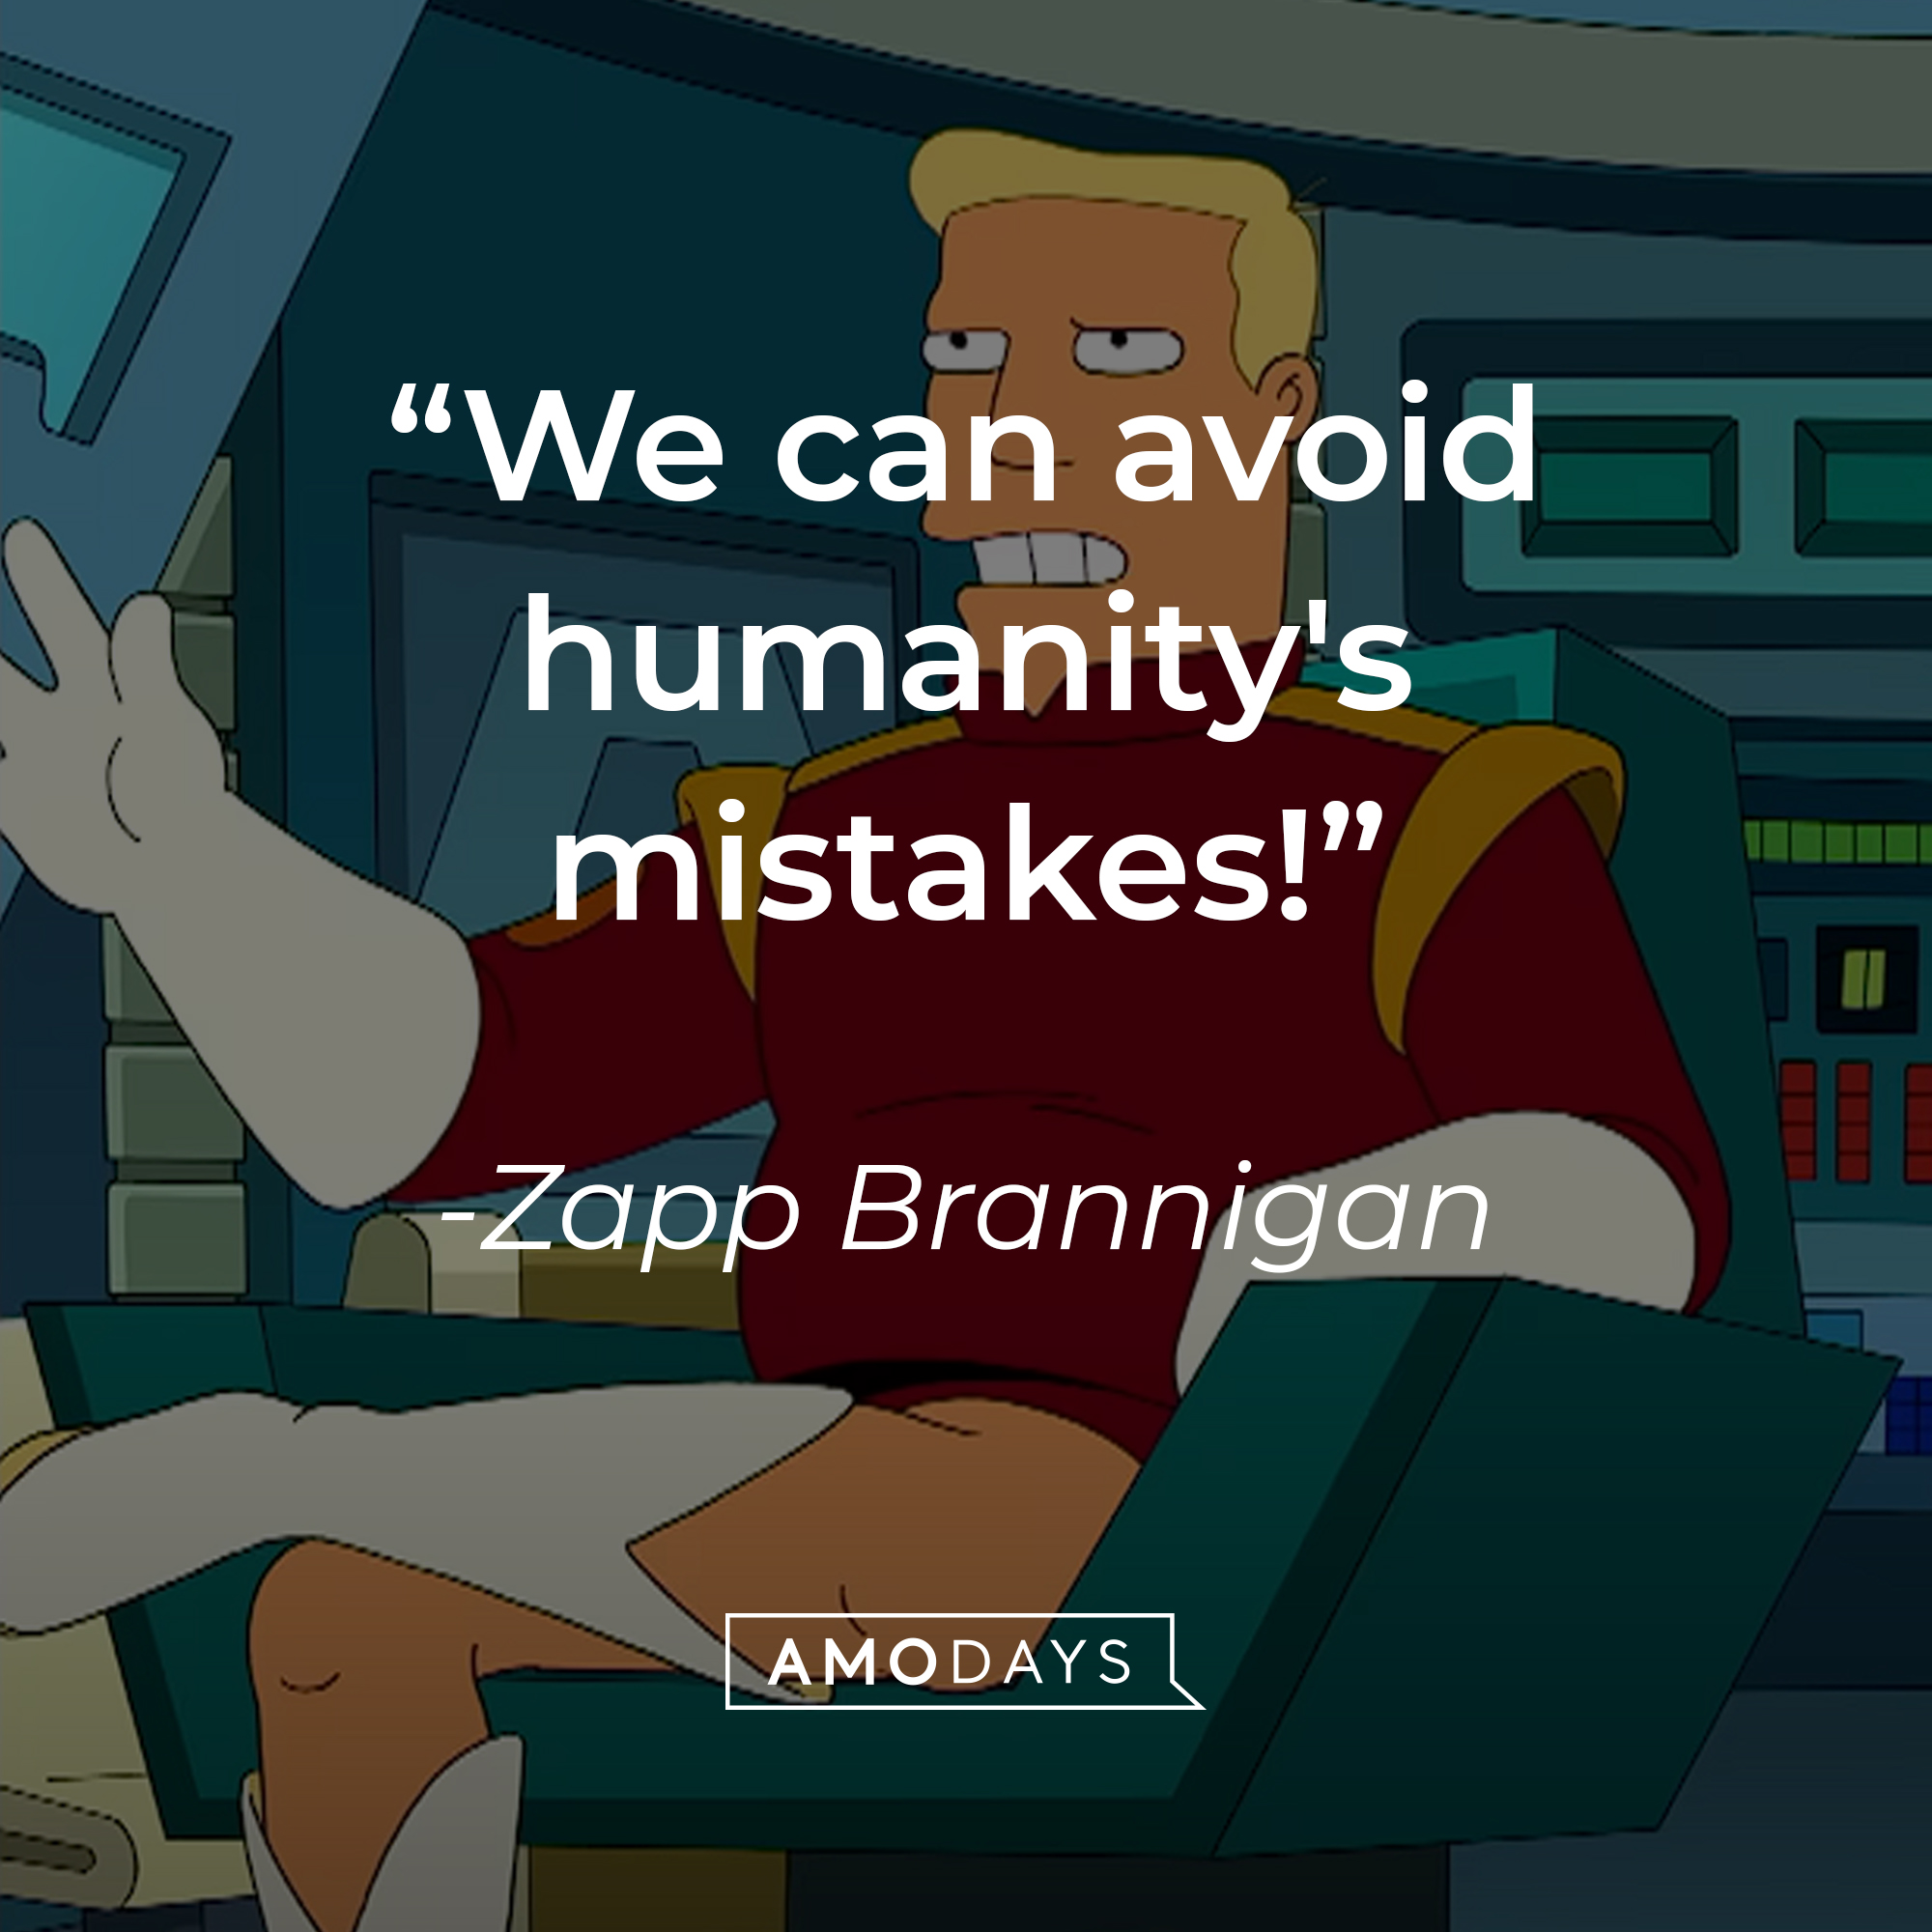 Zapp Brannigan's quote: "We can avoid humanity's mistakes!" | Source: YouTube/adultswim